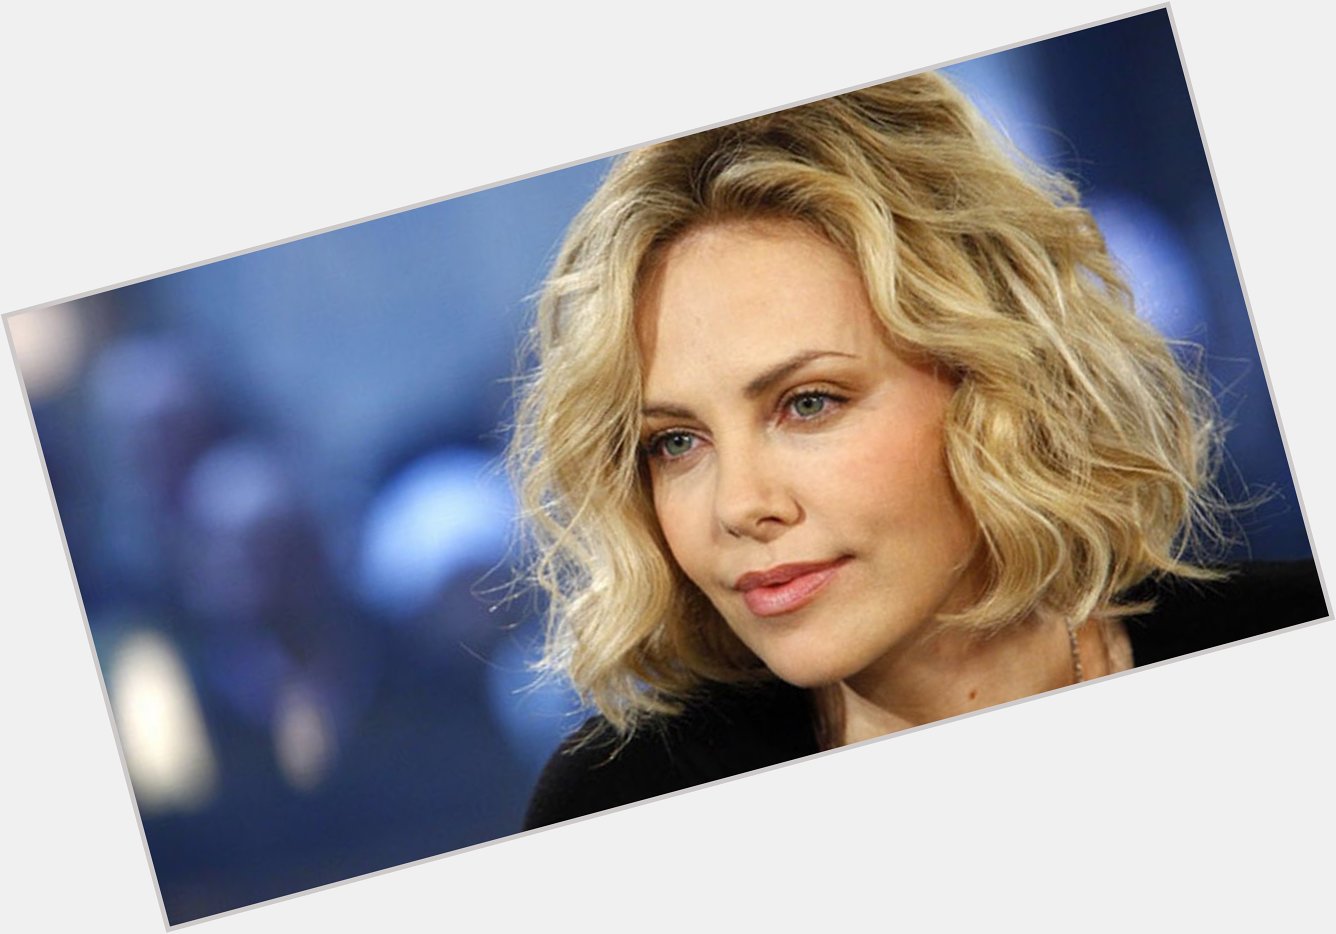 Happy birthday Charlize Theron. 42 years young and just getting started.  